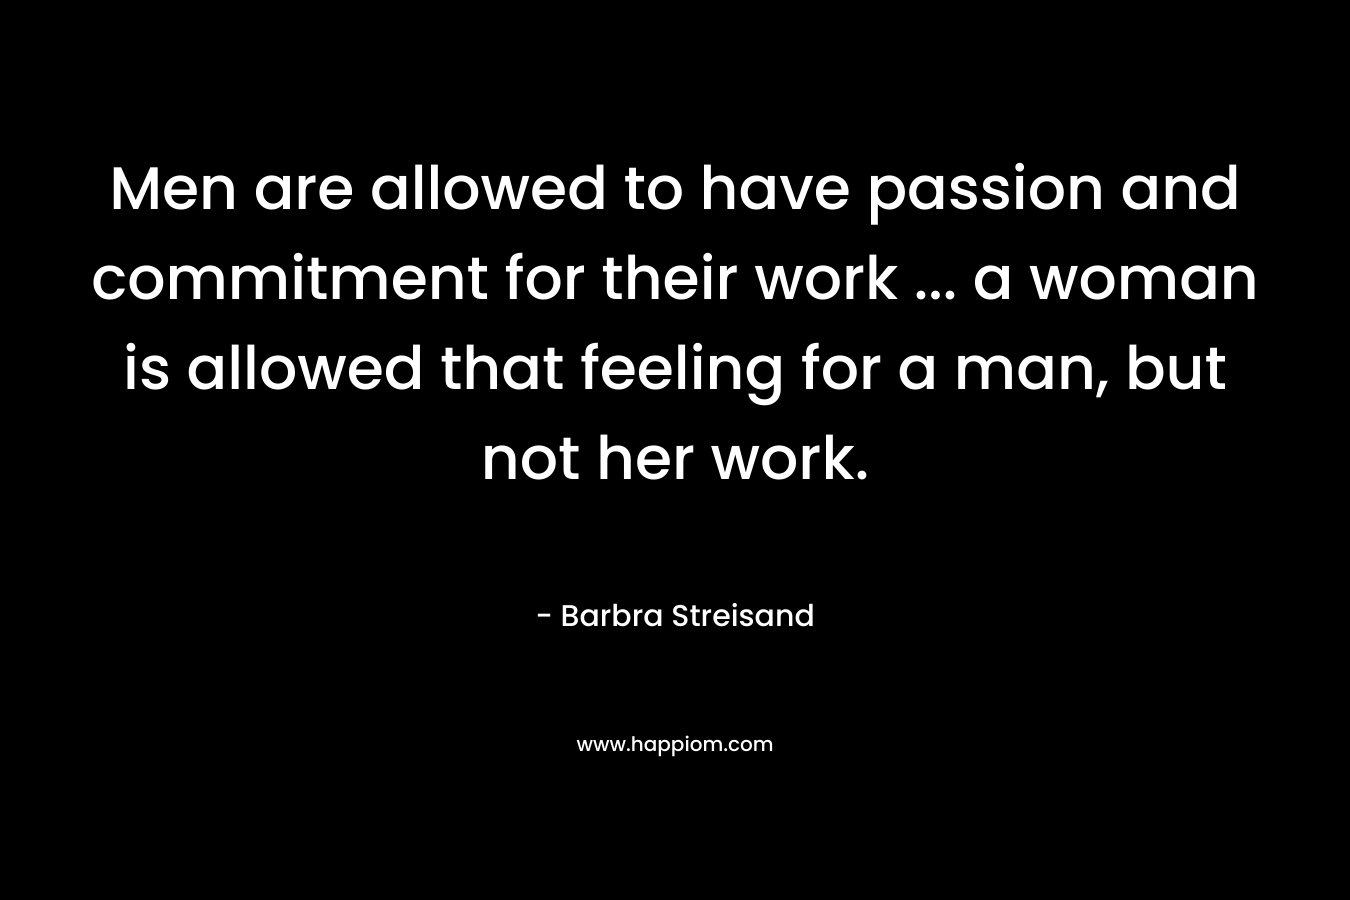 Men are allowed to have passion and commitment for their work ... a woman is allowed that feeling for a man, but not her work.